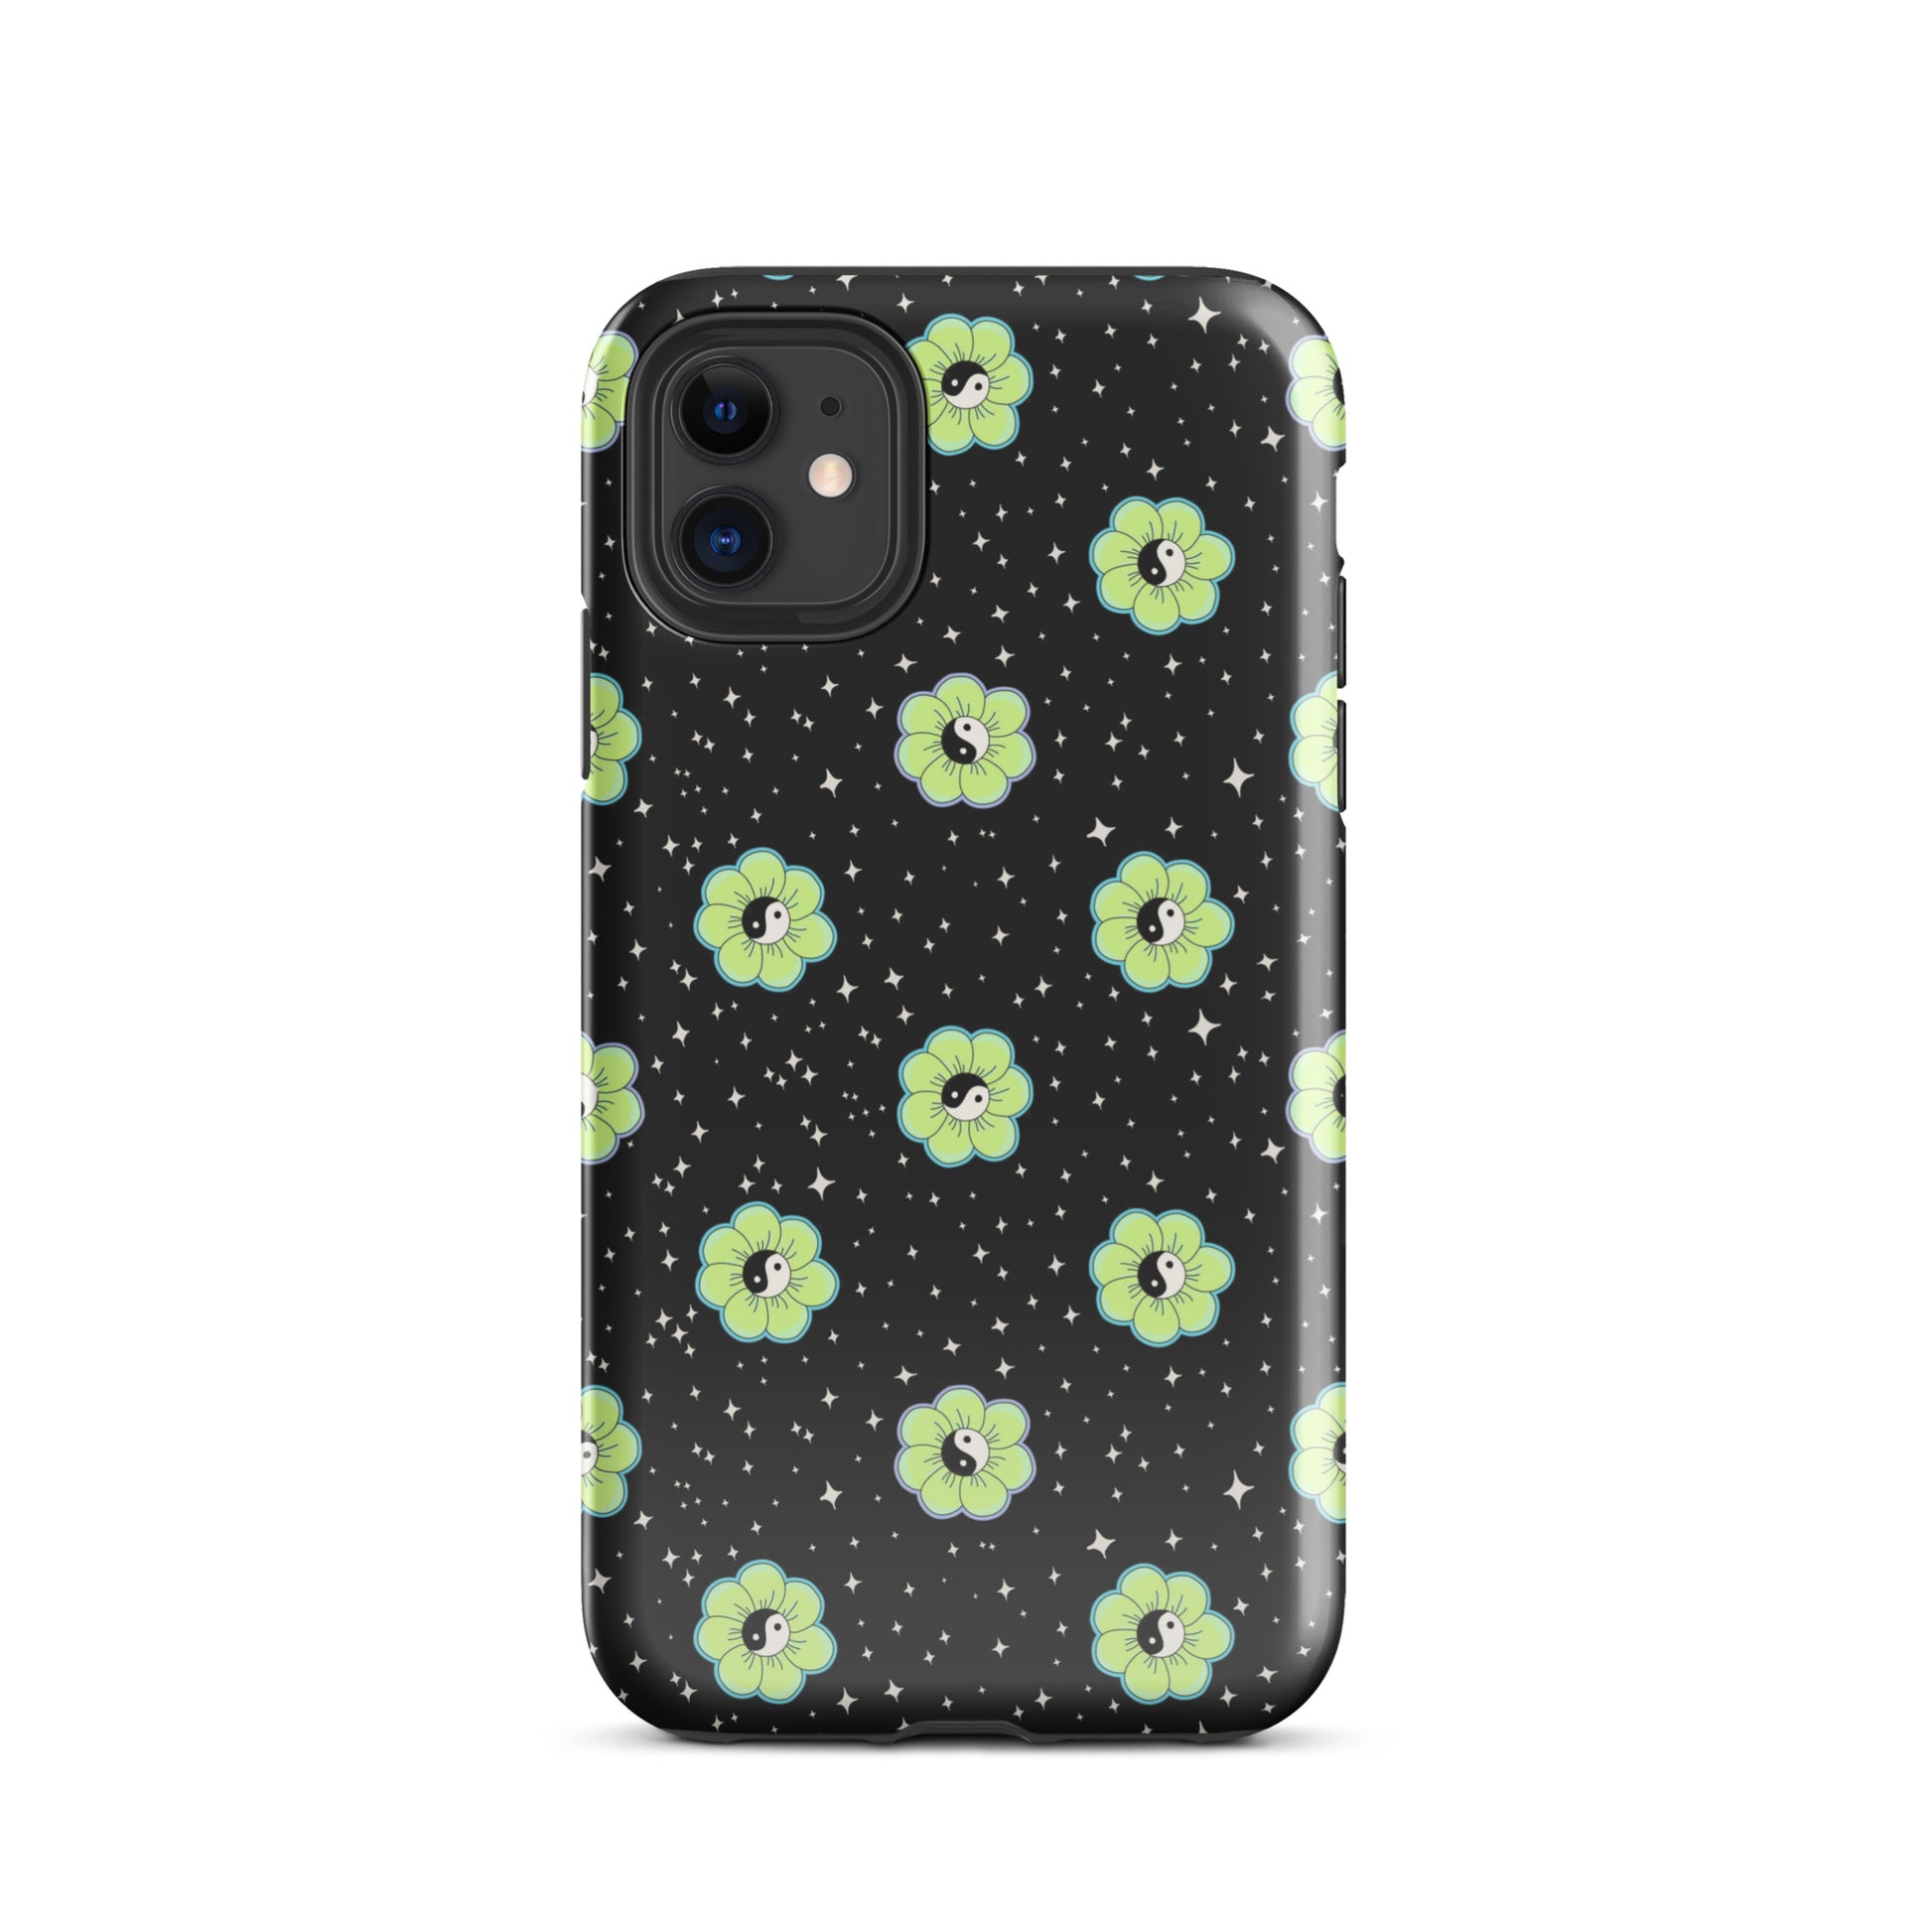 Yin & Yang Bloom iPhone Case iPhone 11 Glossy